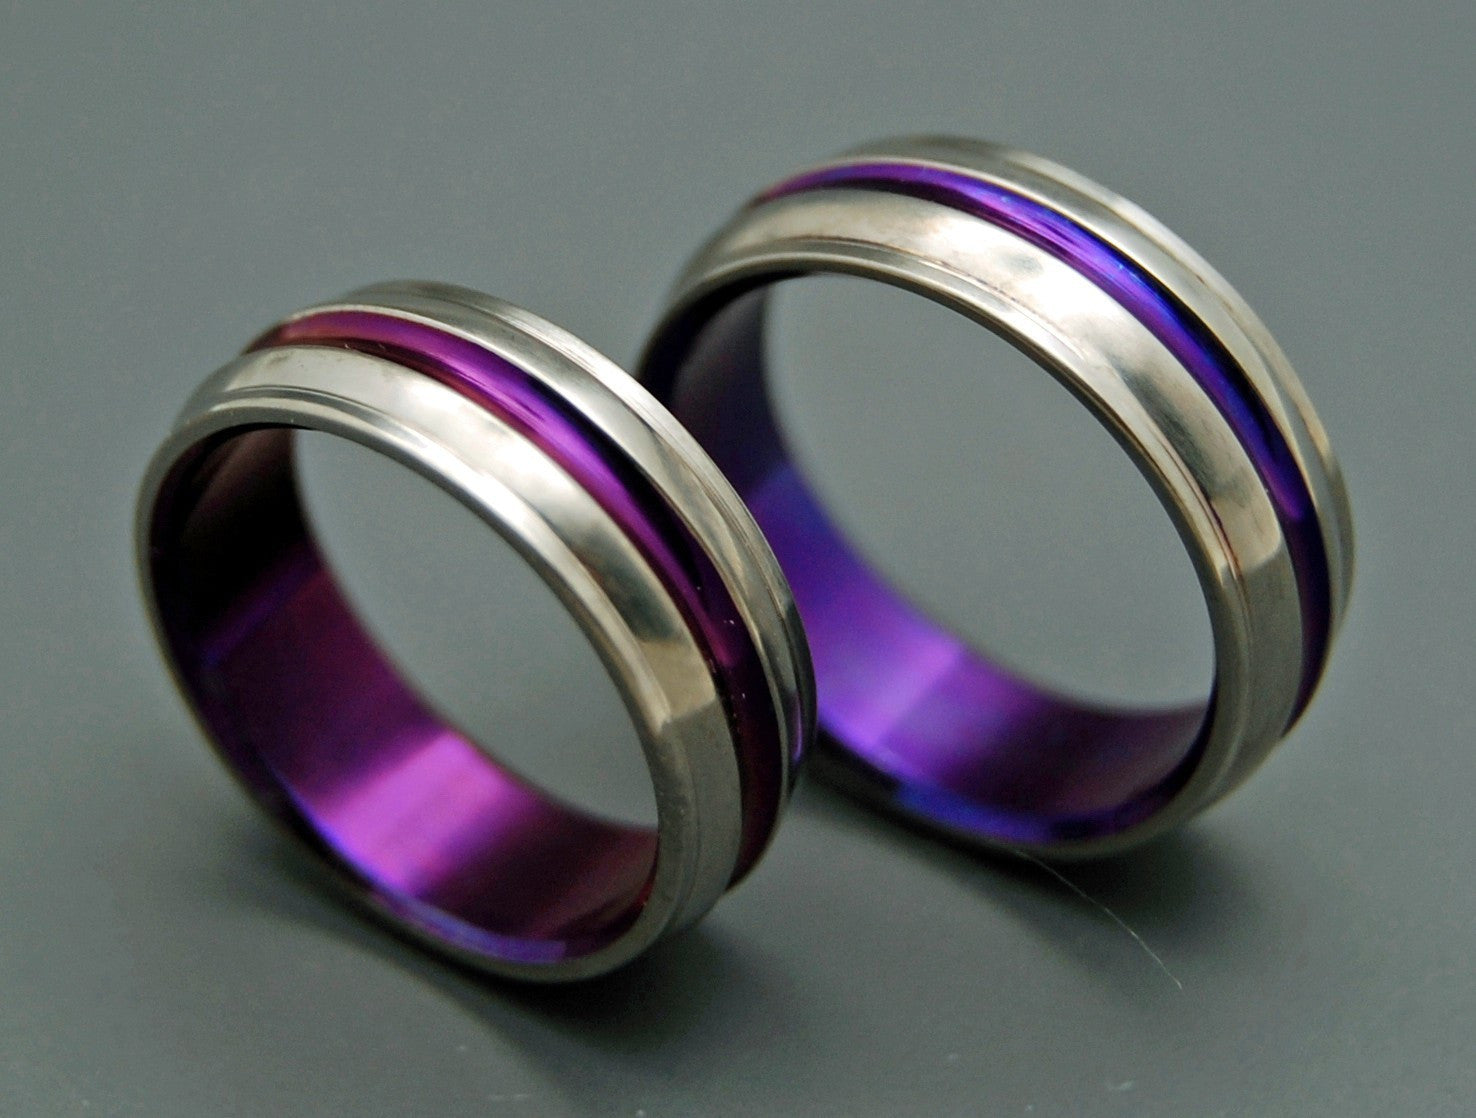 PASSION FOR PURPLE | Purple Handcrafted Titanium Custom Rings Wedding Ring Set - Minter and Richter Designs